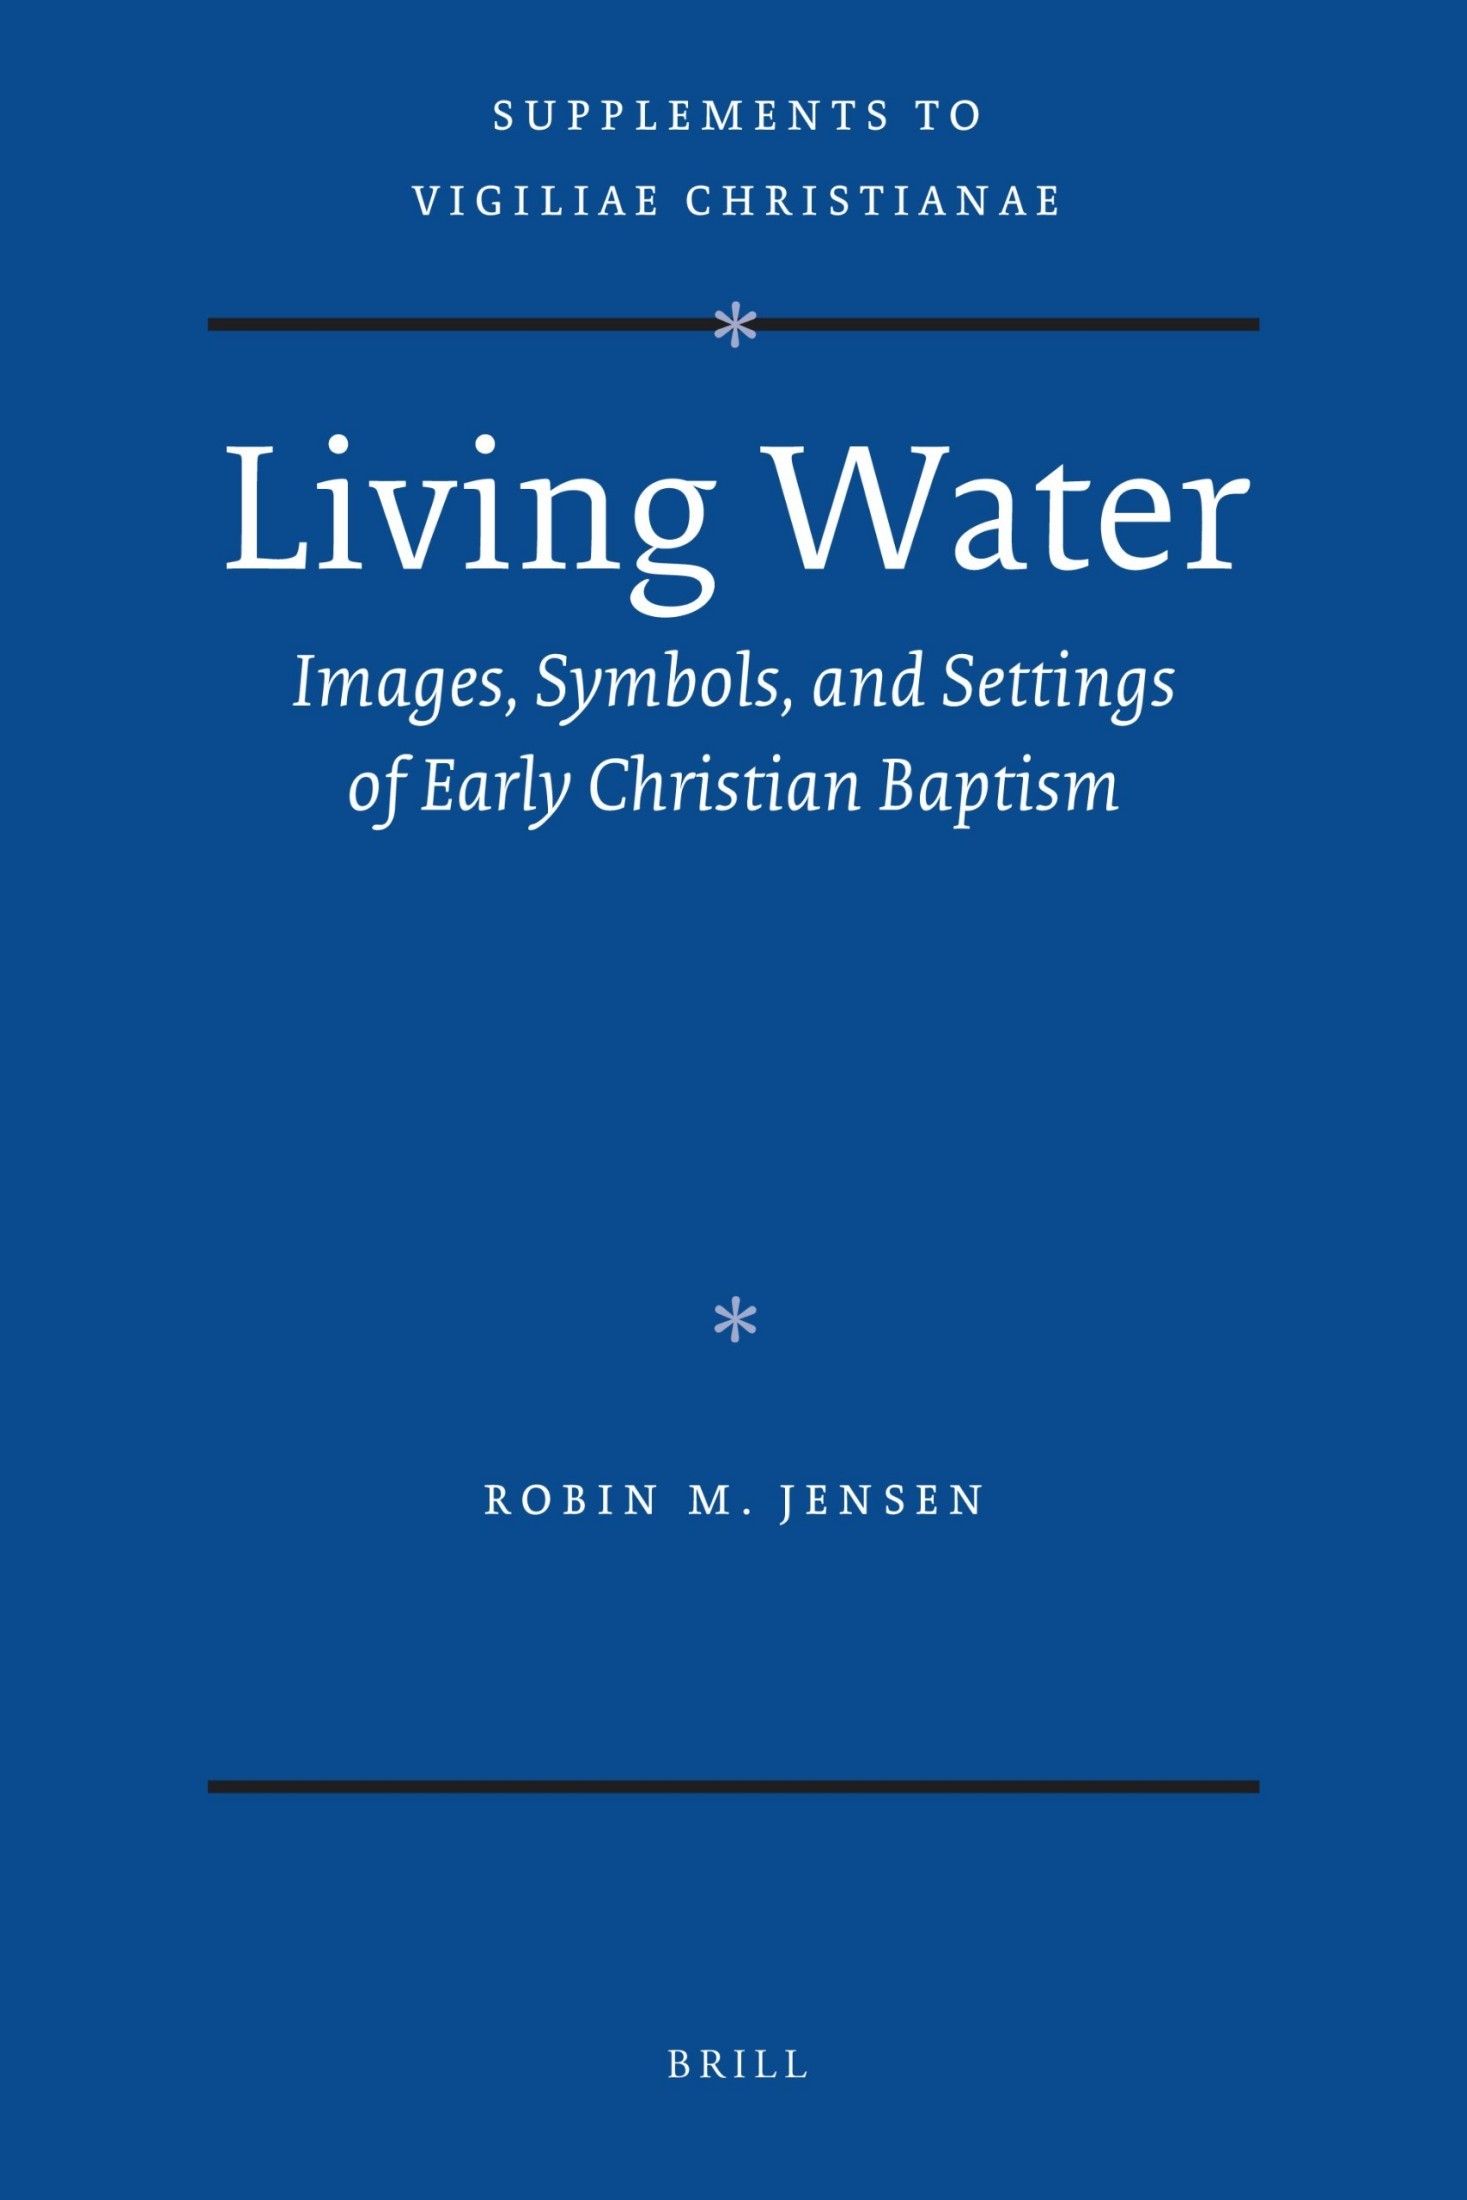 Living Water: Images, Symbols, and Settings of Early Christian Baptism